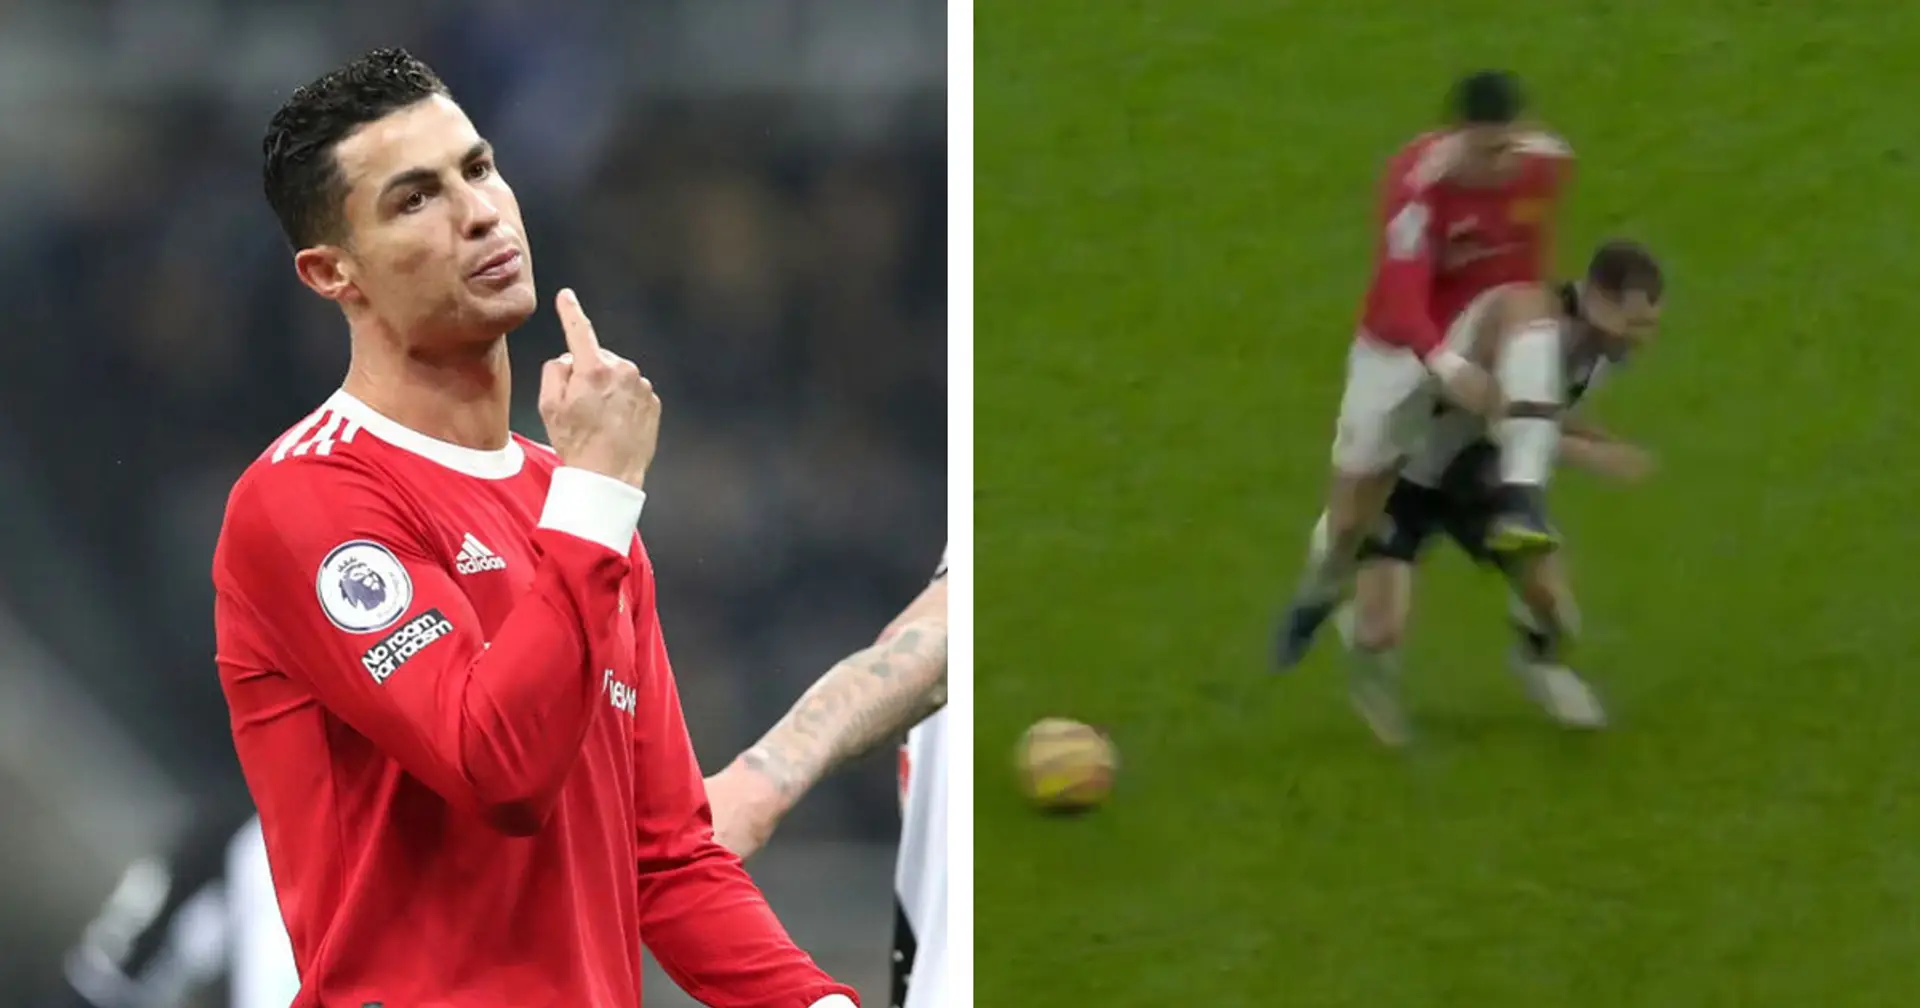 'Complete idiot if things aren’t going his way': some United fans argue Ronaldo deserved red card vs Newcastle